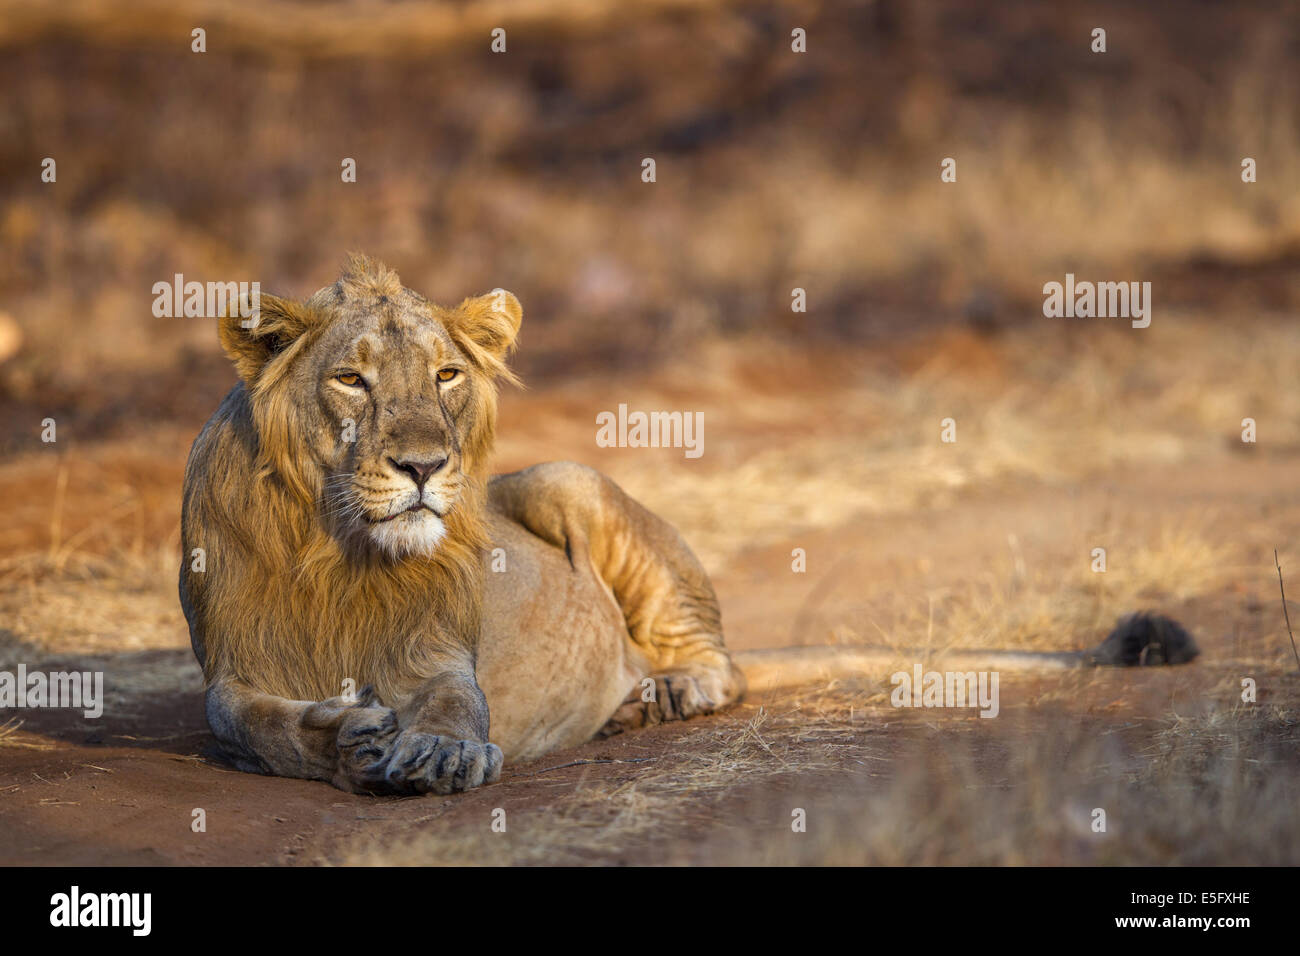 Asiatic Lions (Panthera leo persica) at Gir forest, Gujarat, India. Stock Photo